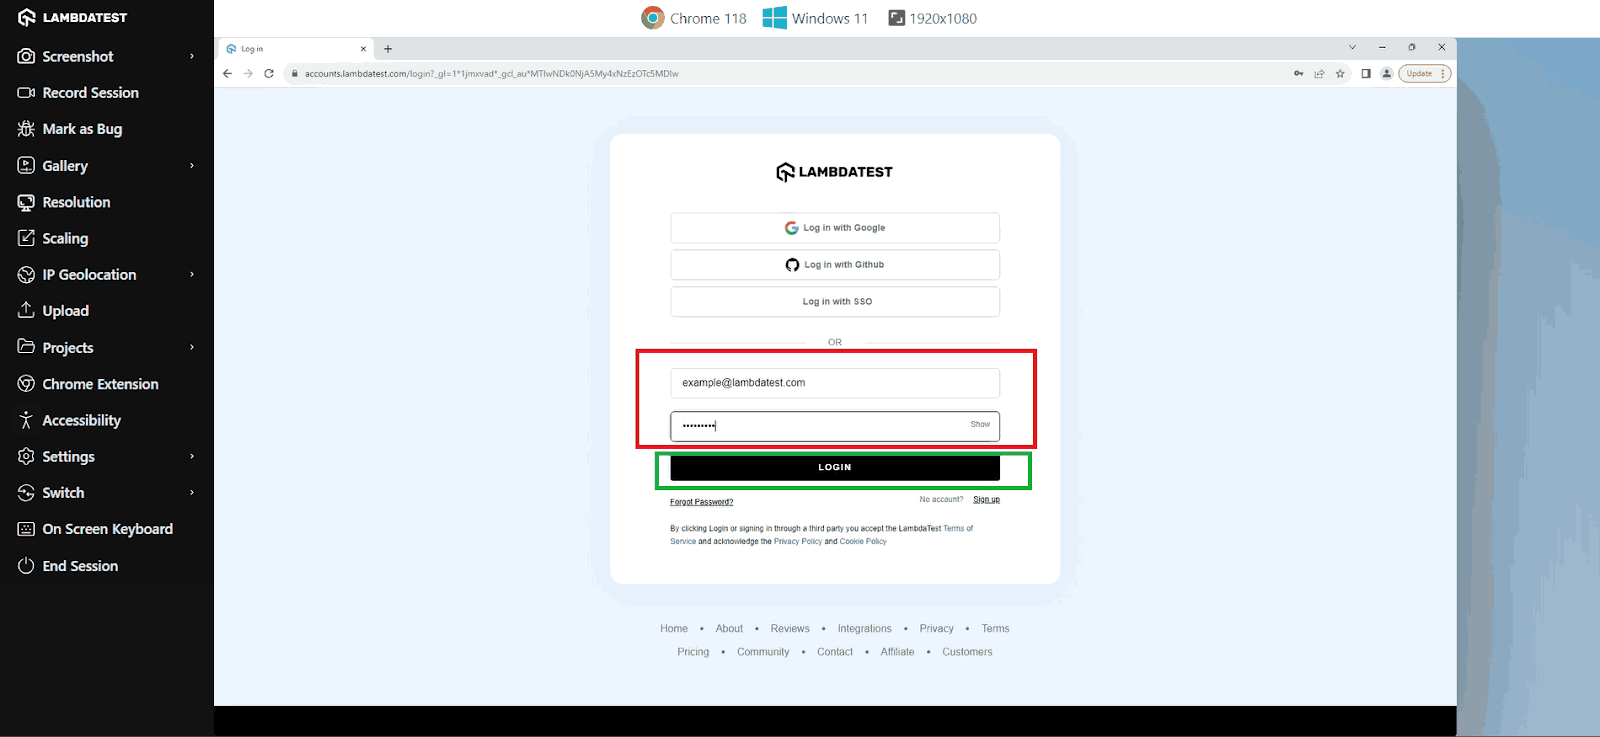 Login form Enter email and password, then click LOGIN